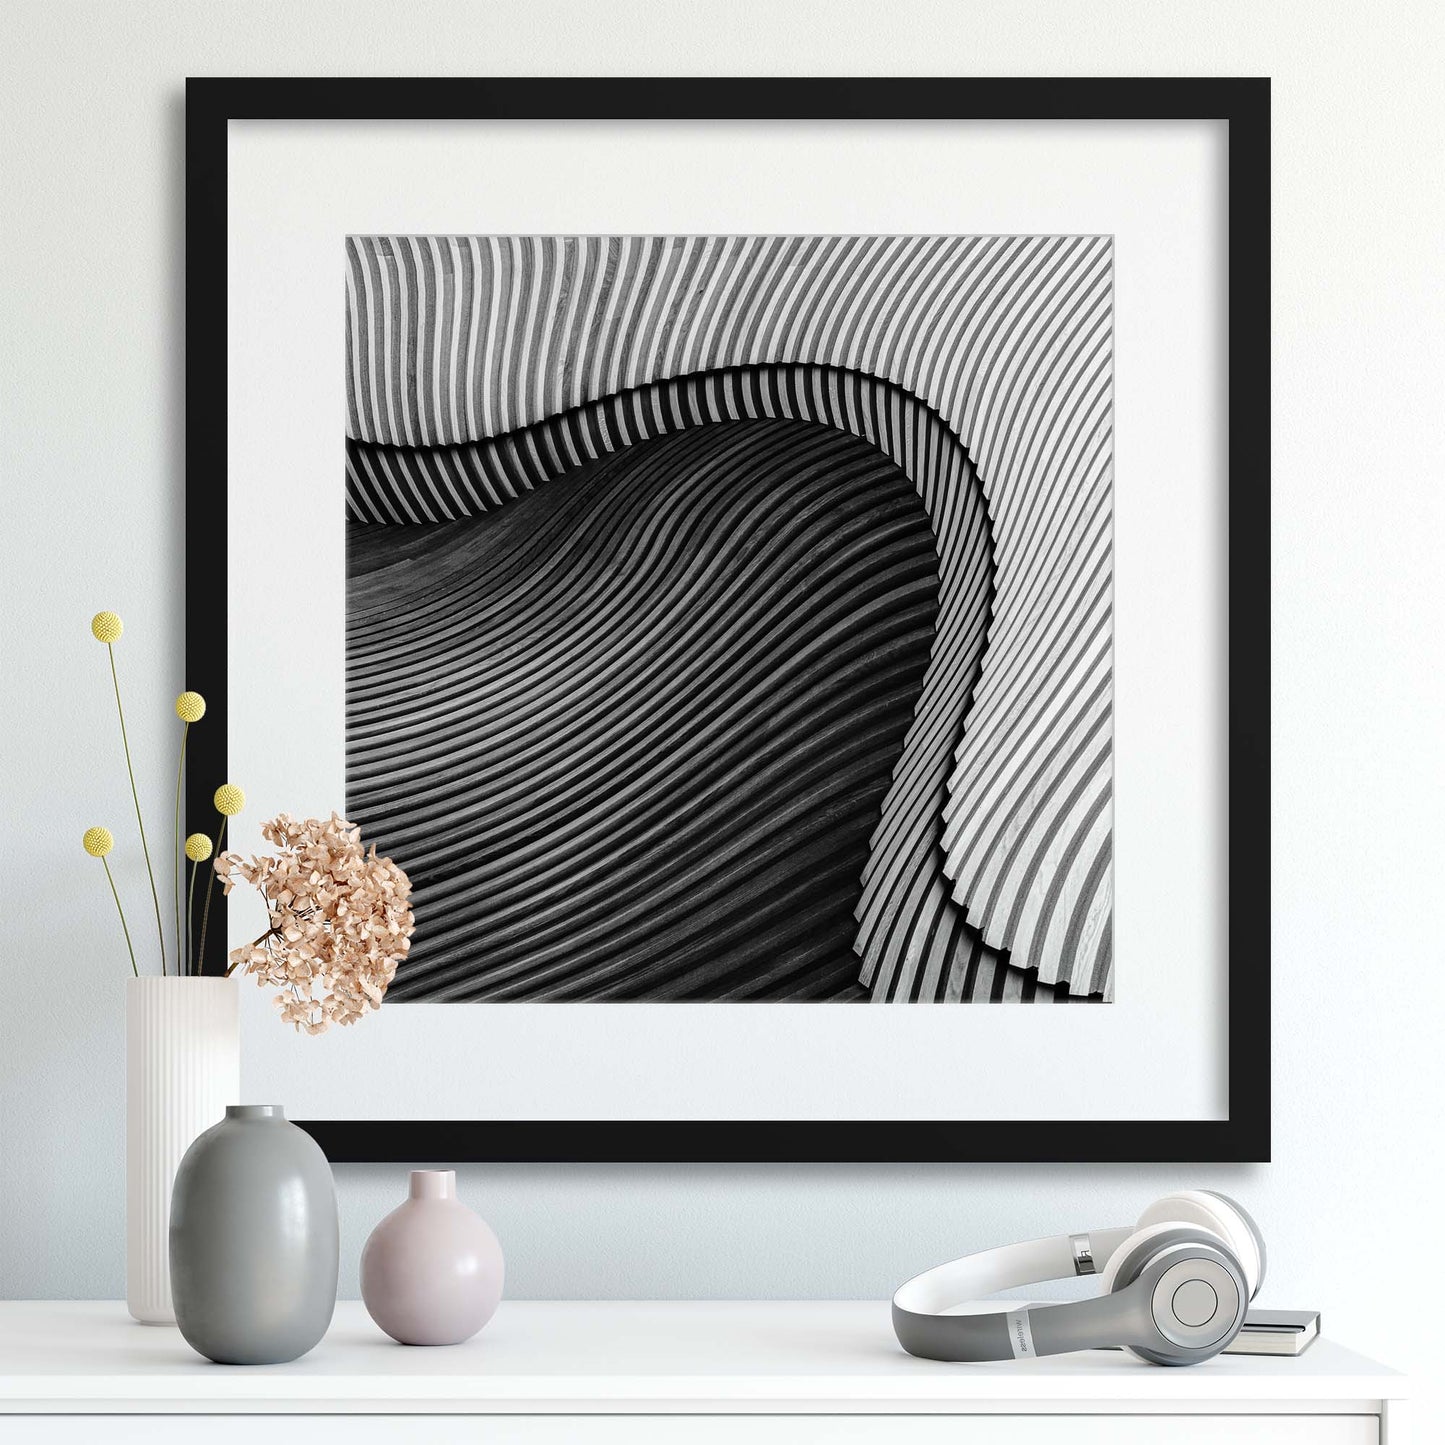 The Wood Project II - Sea Shore by Luc Vangindertael Framed Print - USTAD HOME